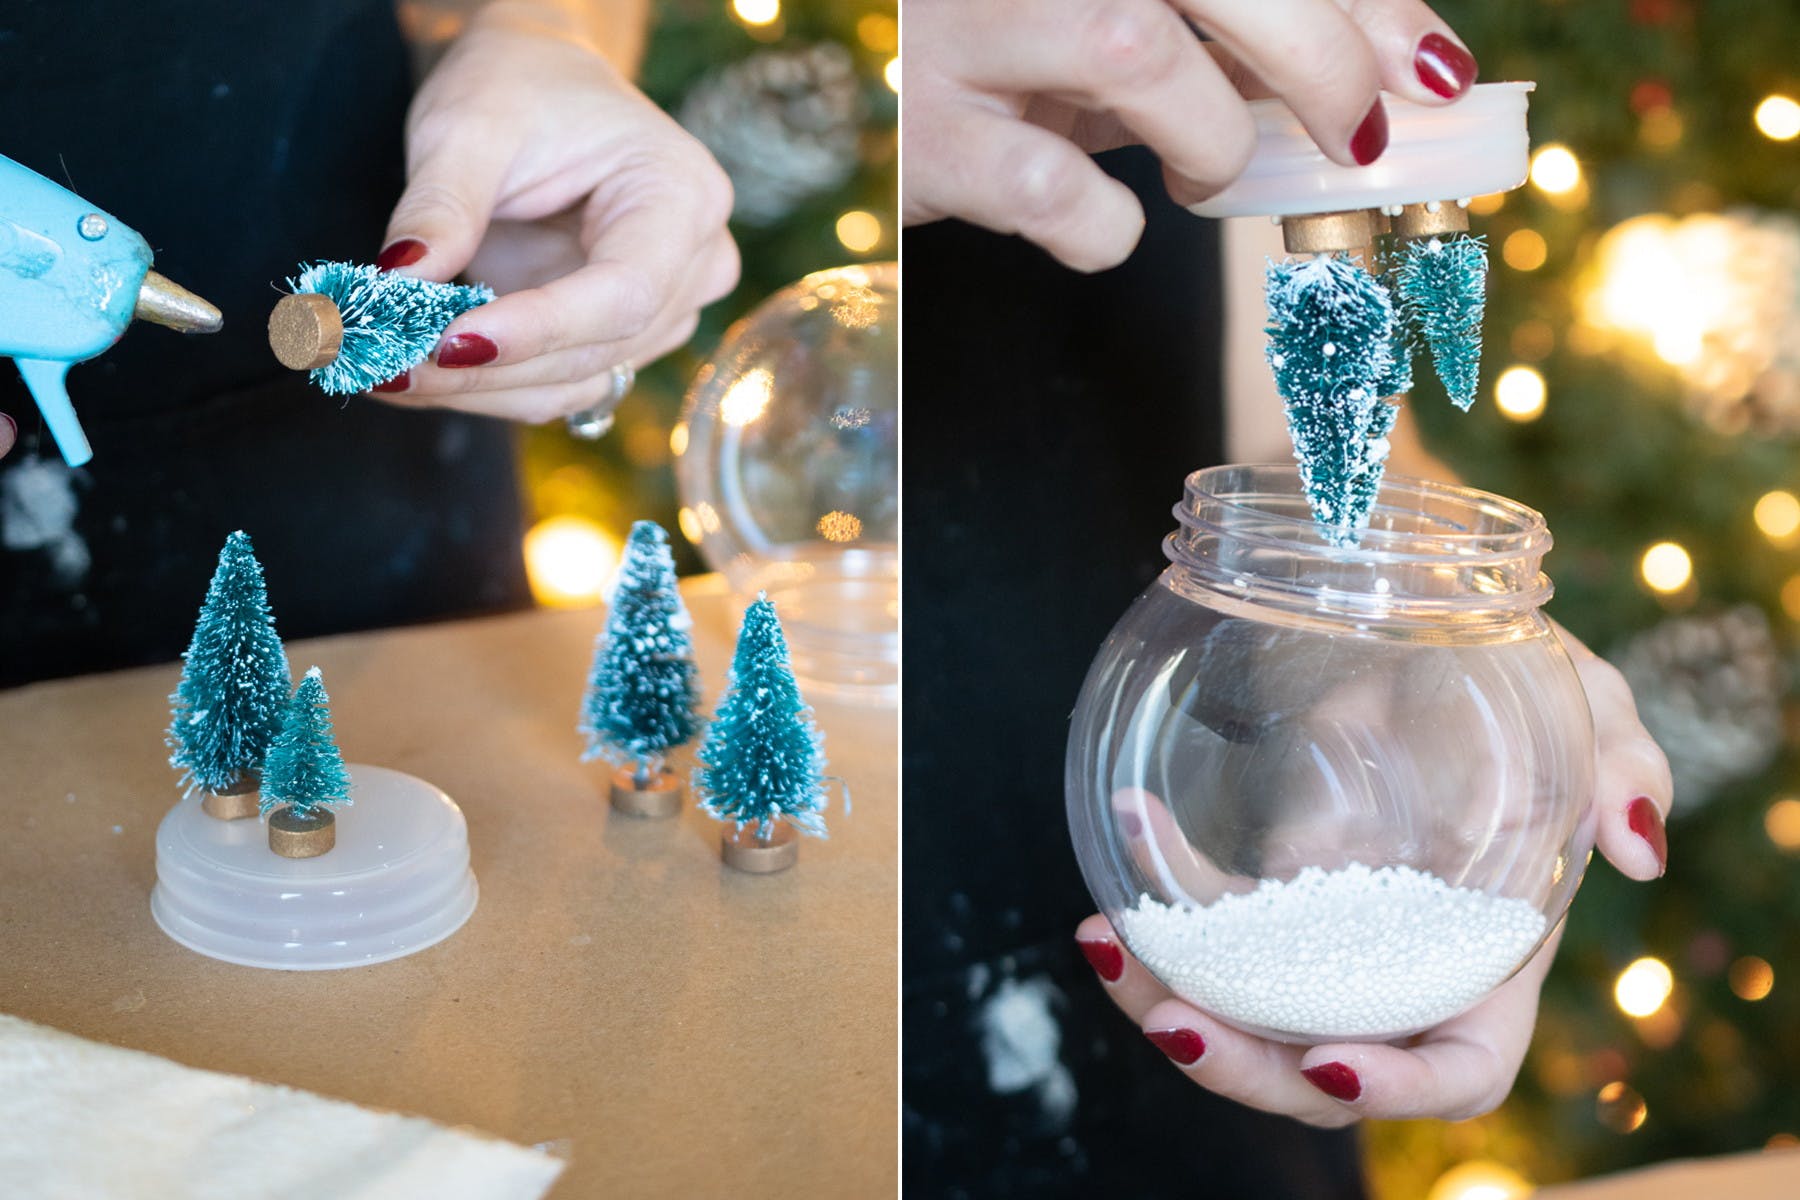 DIY-Christmas-decoration-2 70+ Creative Christmas Decorations to Do in 2021